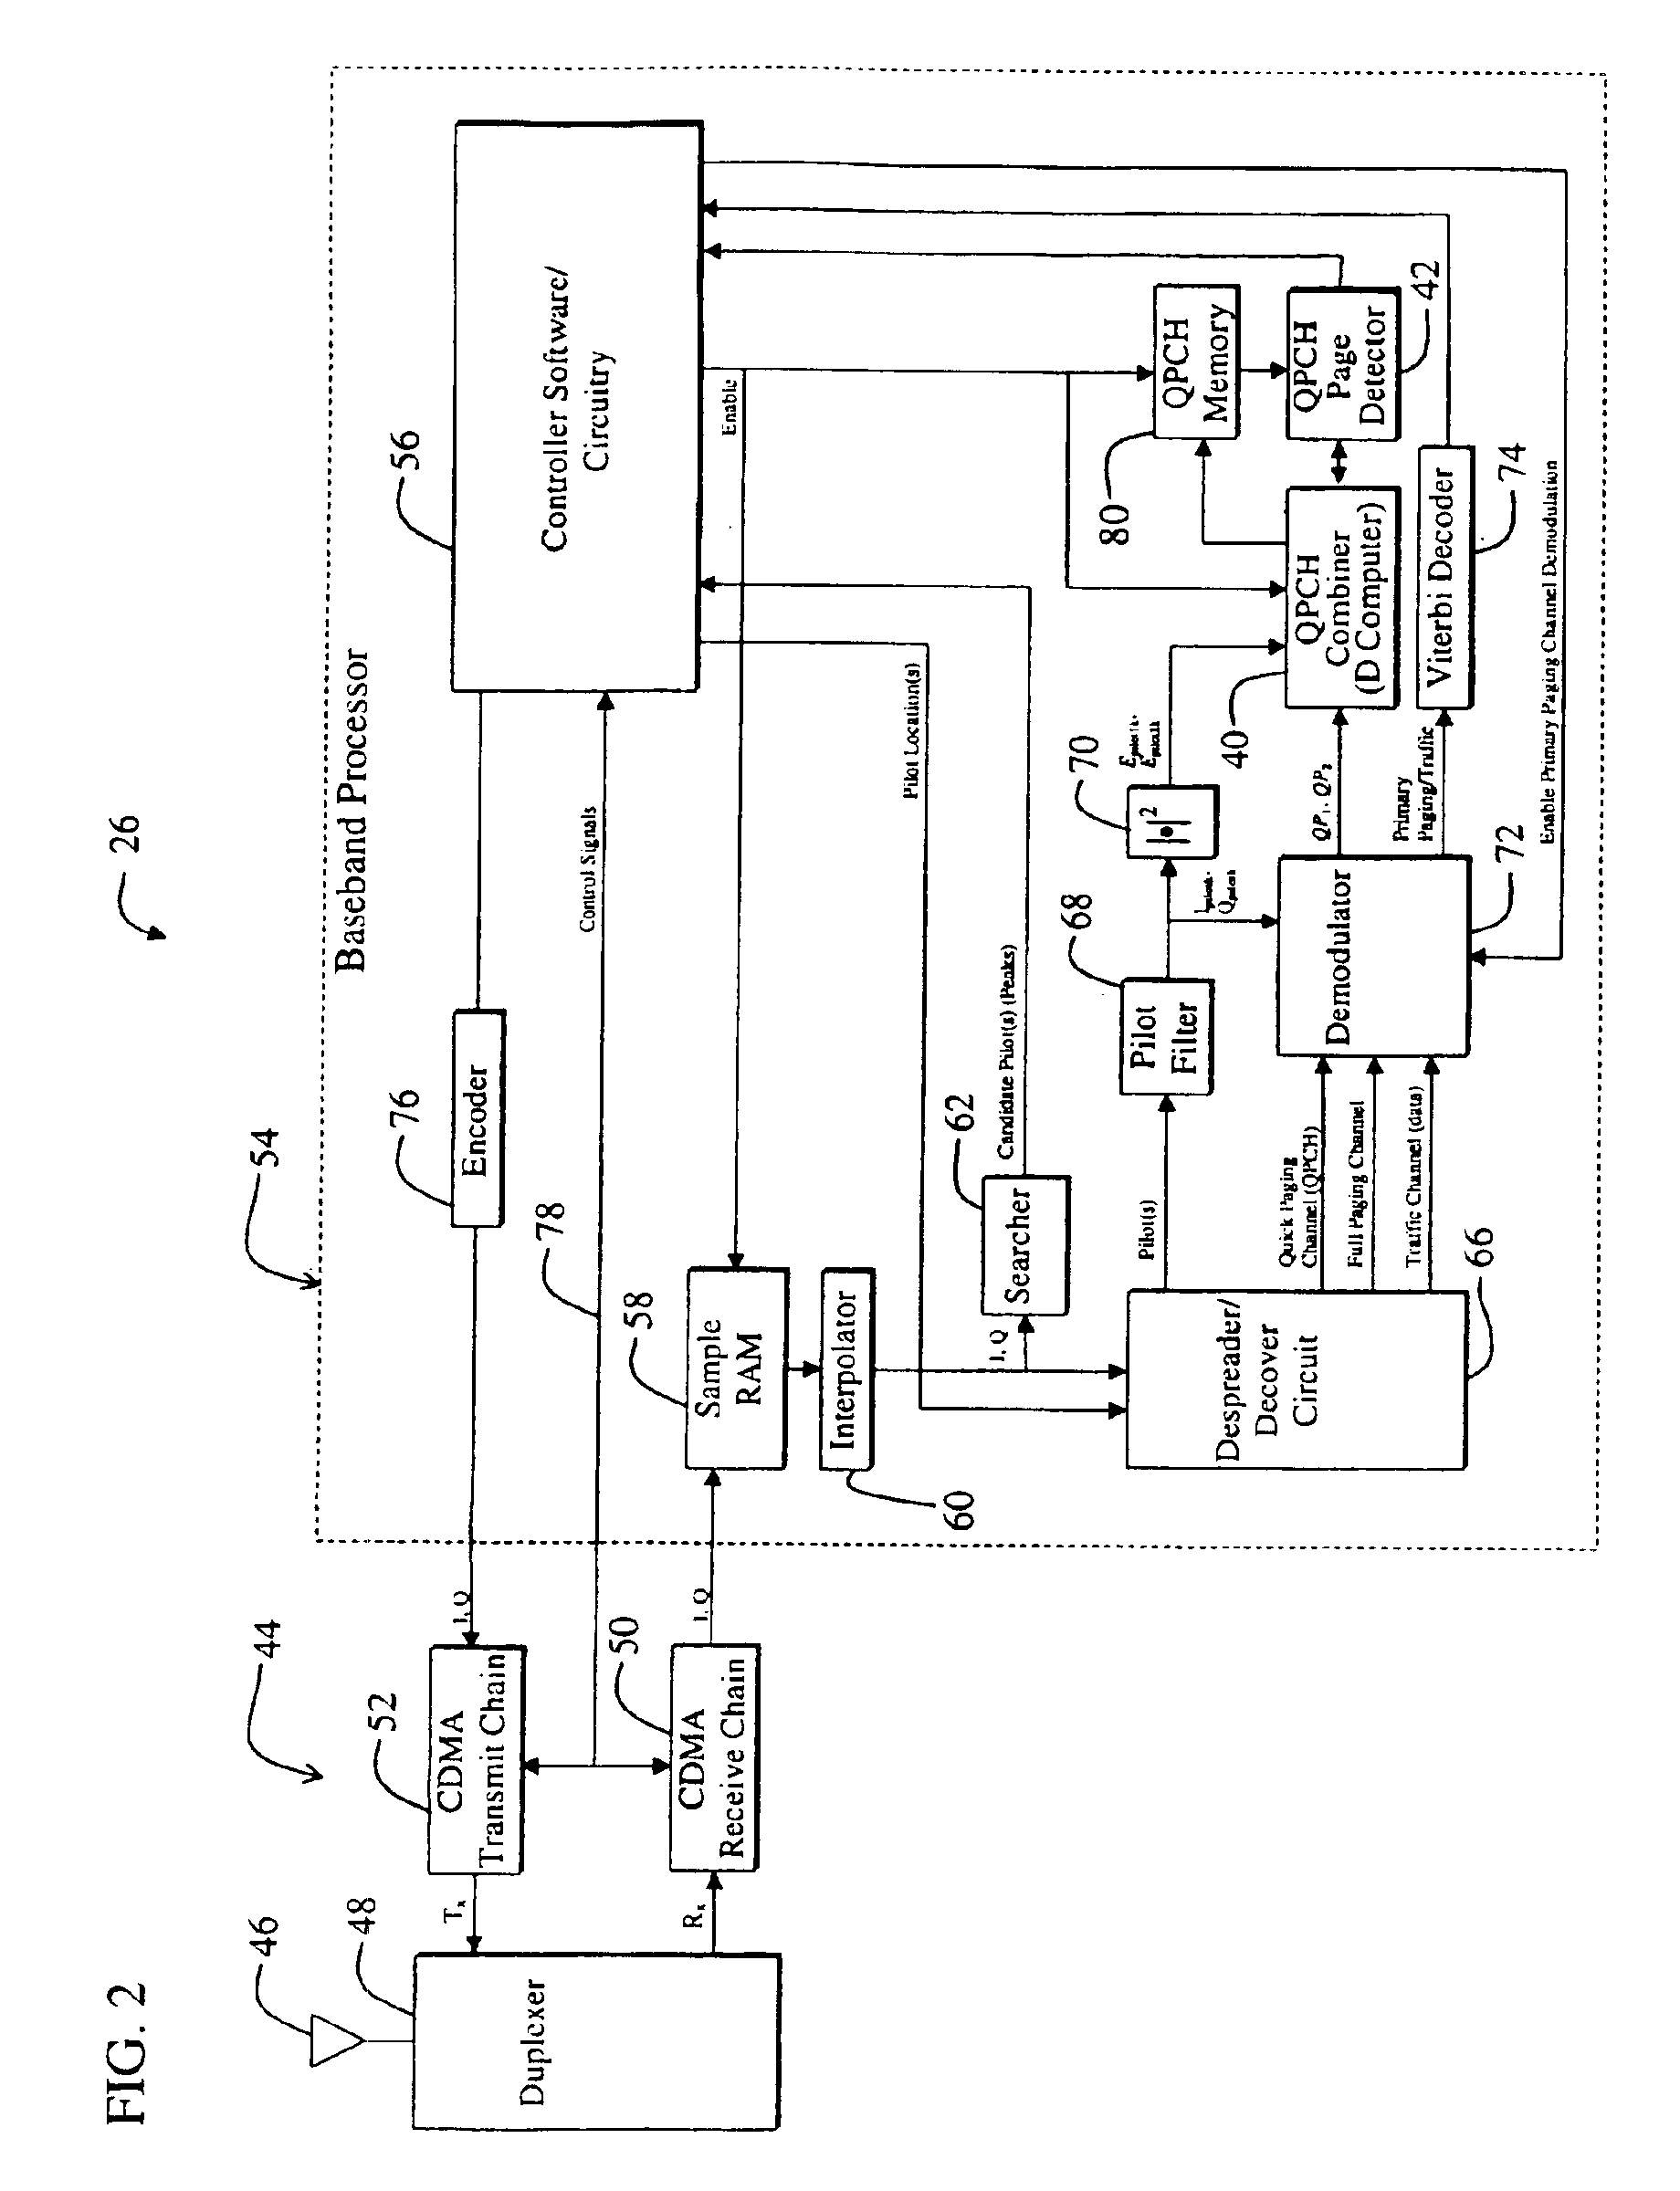 Dual paging channel receiver for a wireless communications system